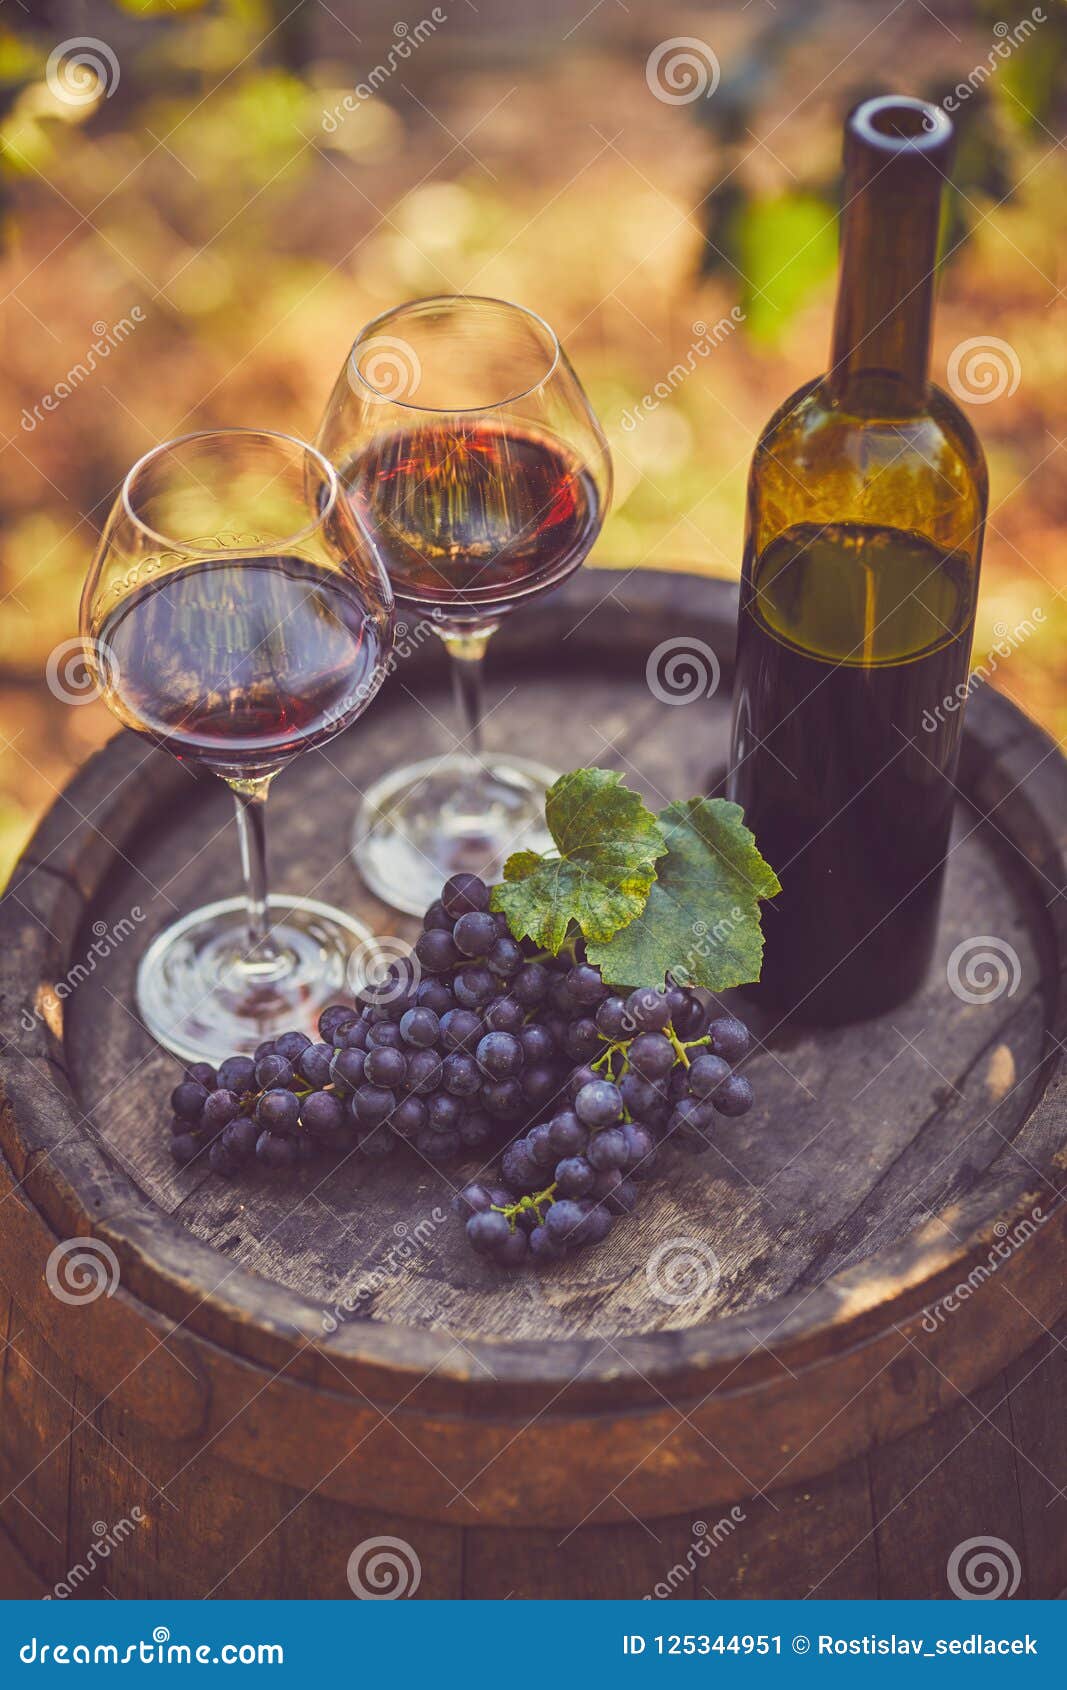 Top View of Two Glasses of Red Wine Stock Image - Image of brown, leaf ...